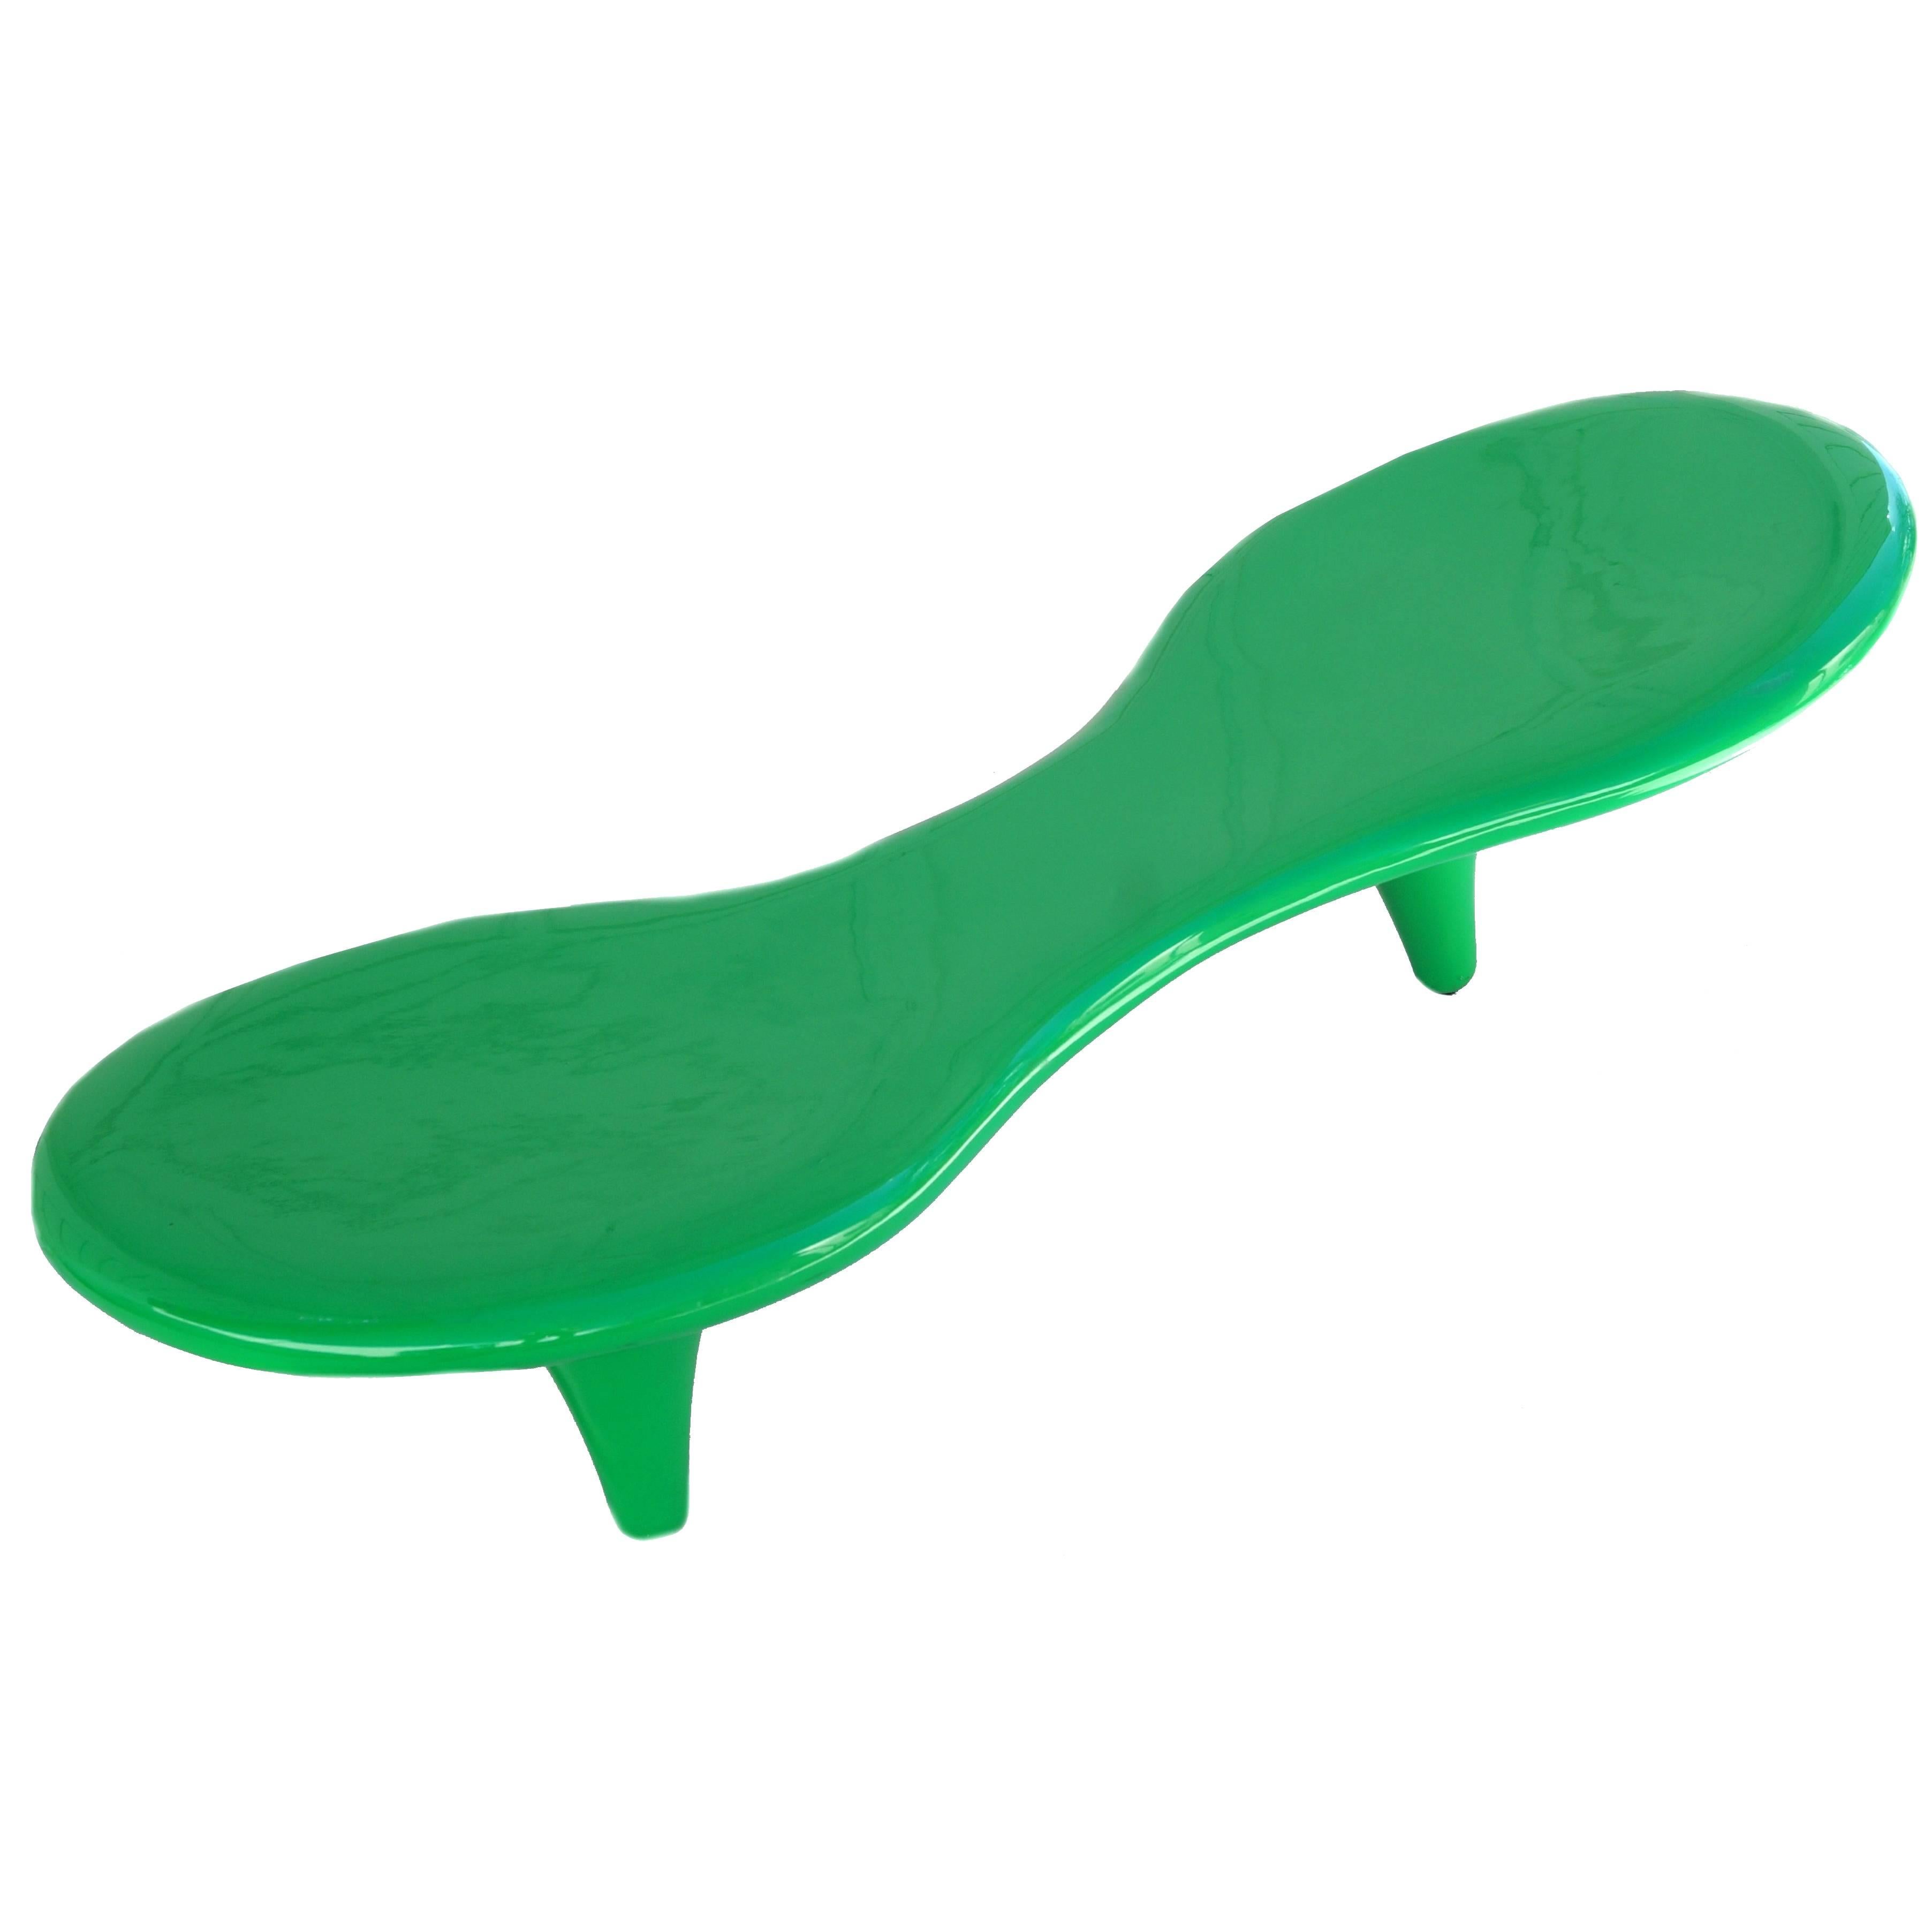 Marc Newson Orgone Chaise Green Longue Bench Scuptural for Cappellini